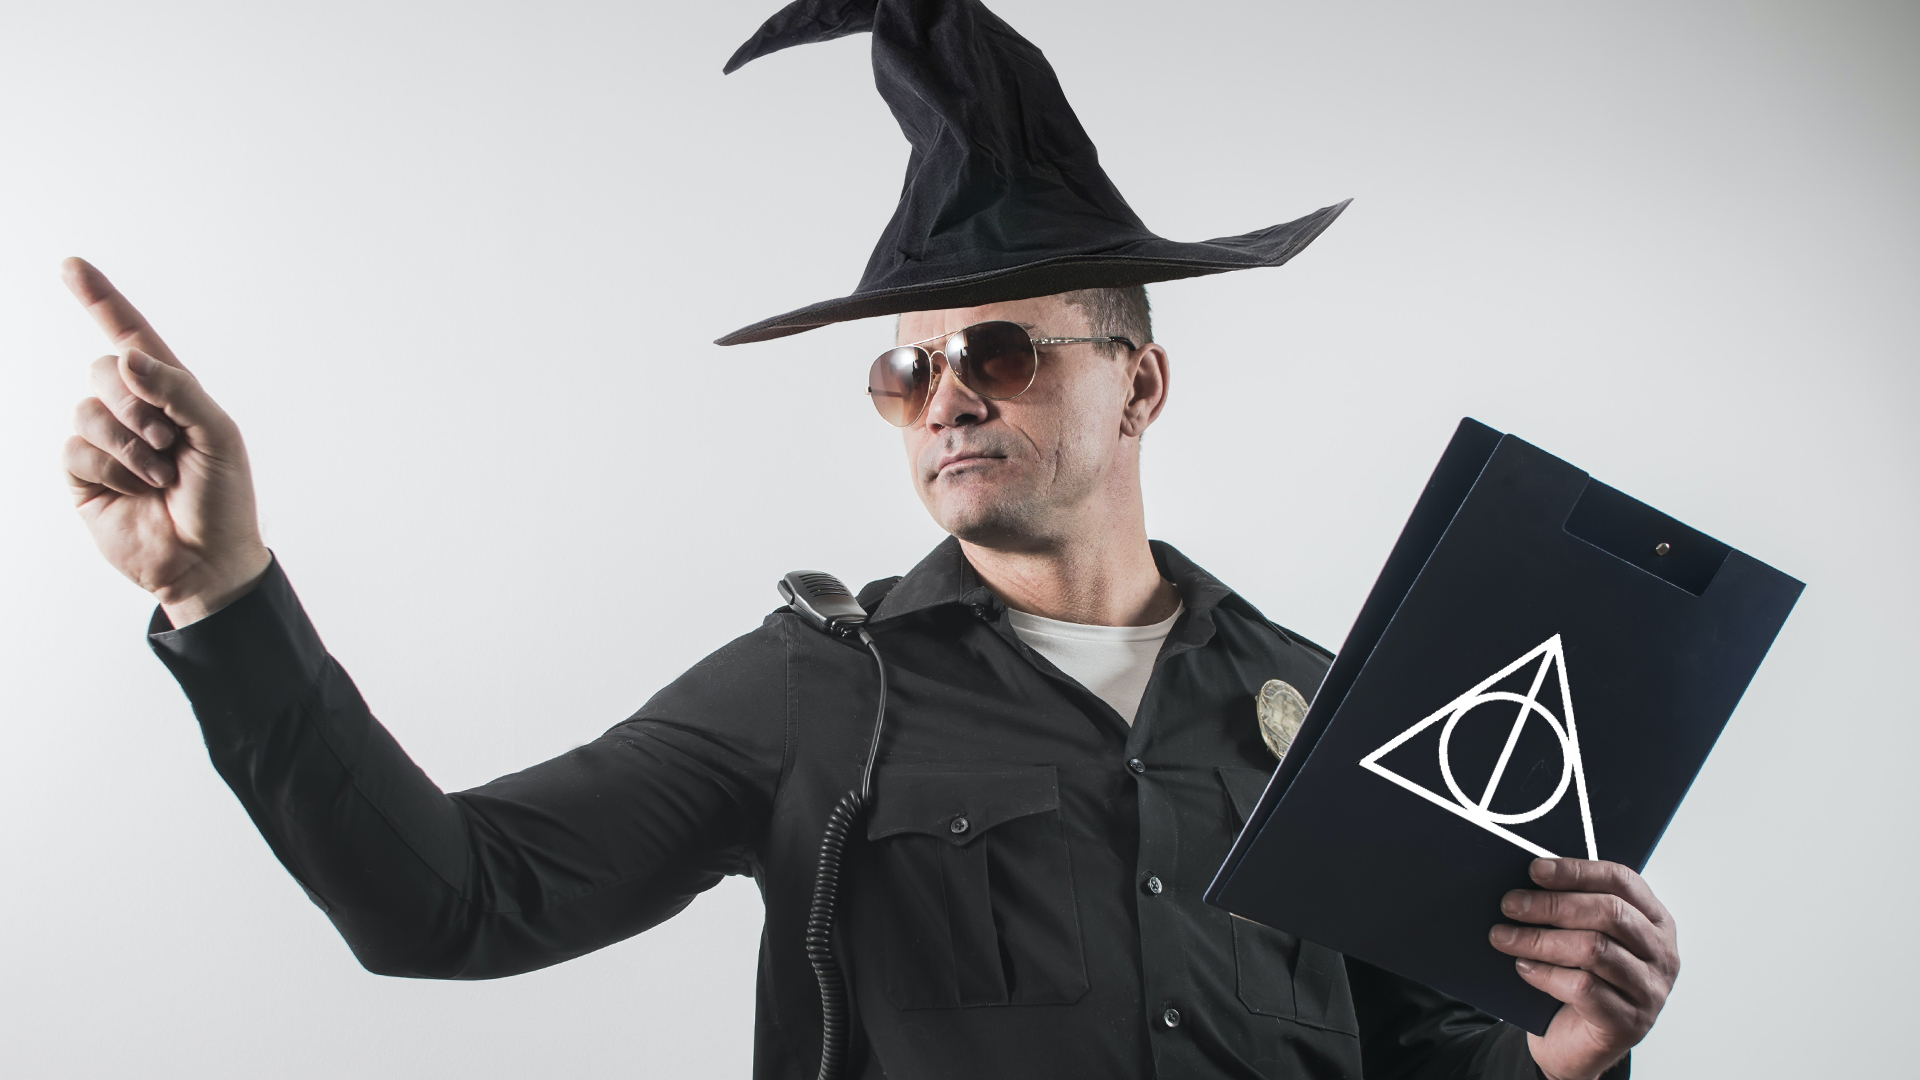 A wizard police officer